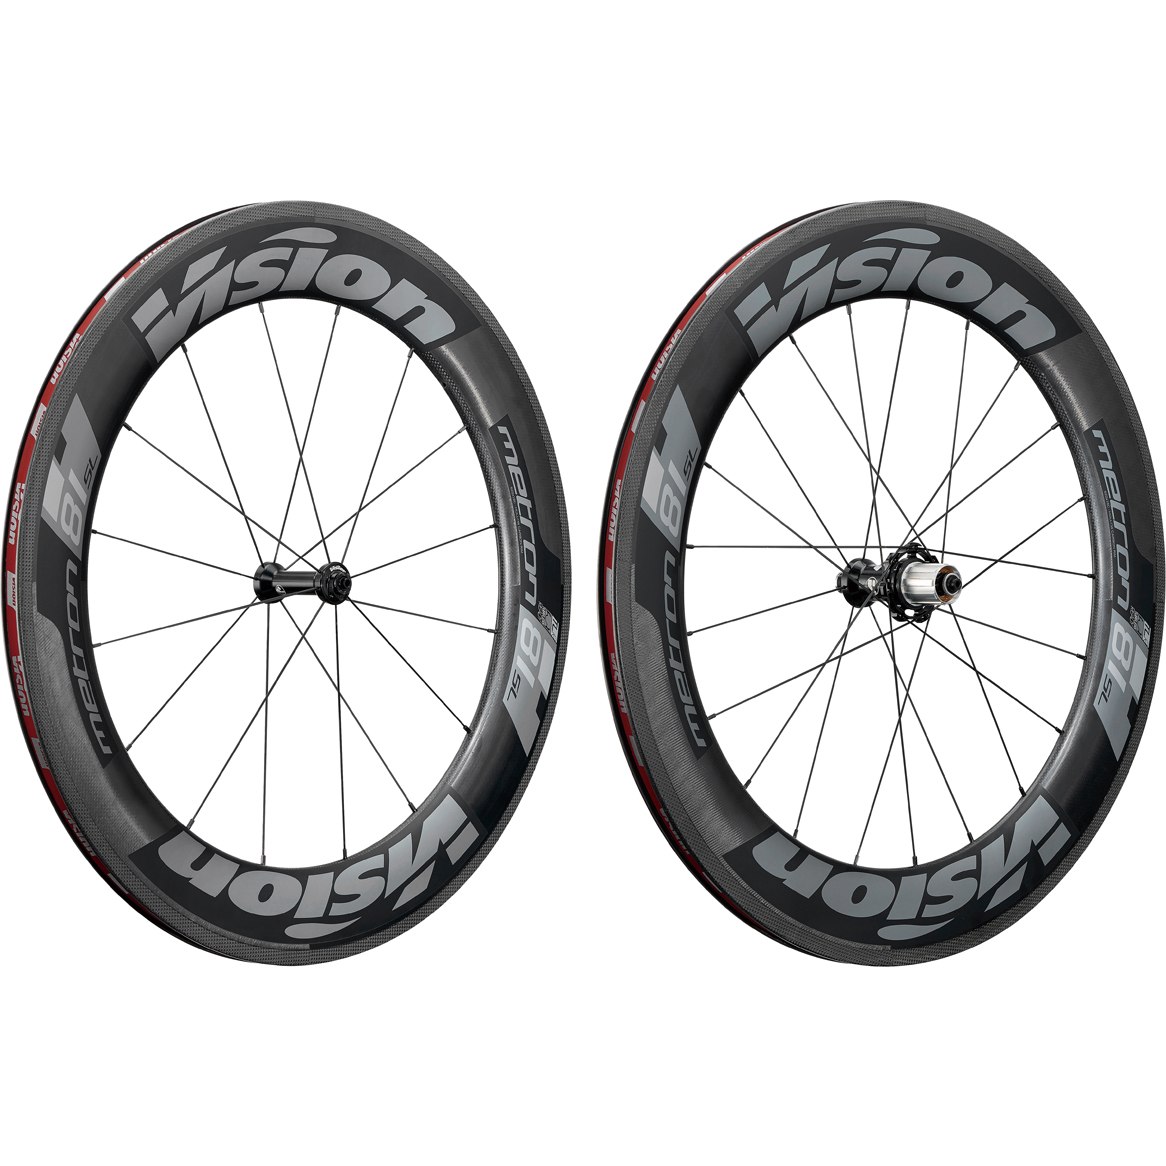 Image of Vision Metron 81 SL Carbon Wheelset - Tubeless Ready - Clincher - SRAM XDR